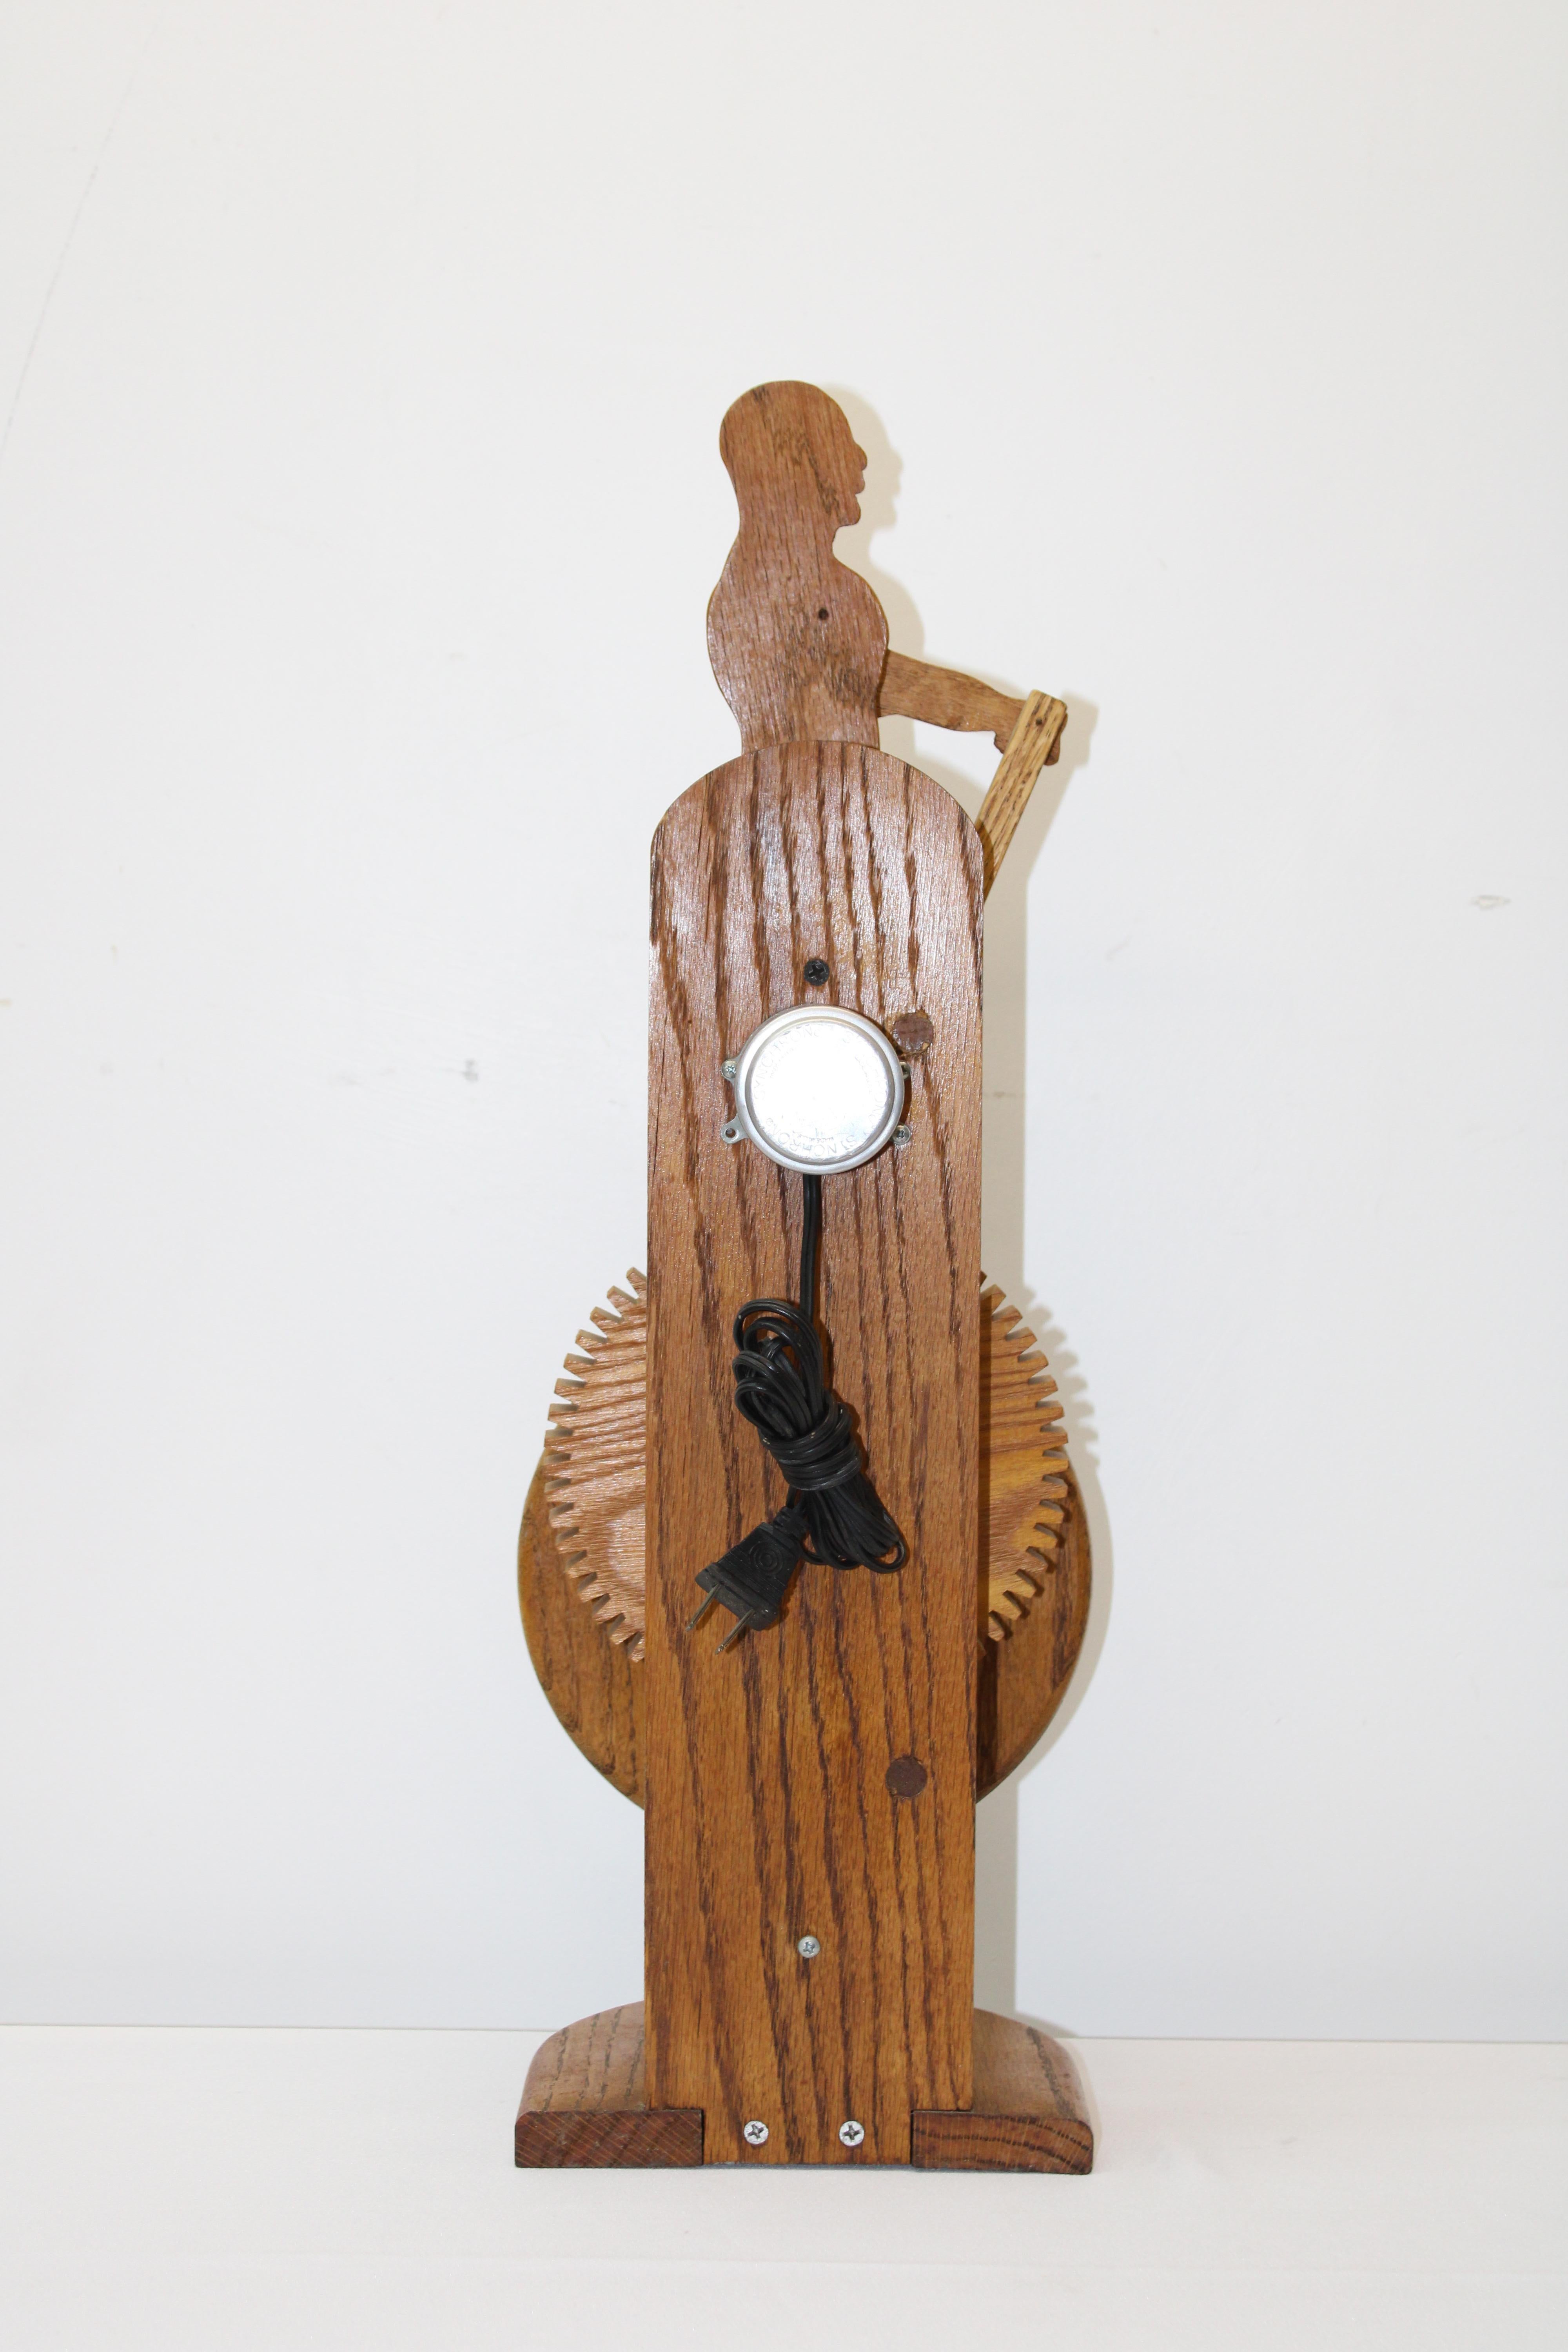 Hand Carved Wood Clock w/ Wooden Gears 2